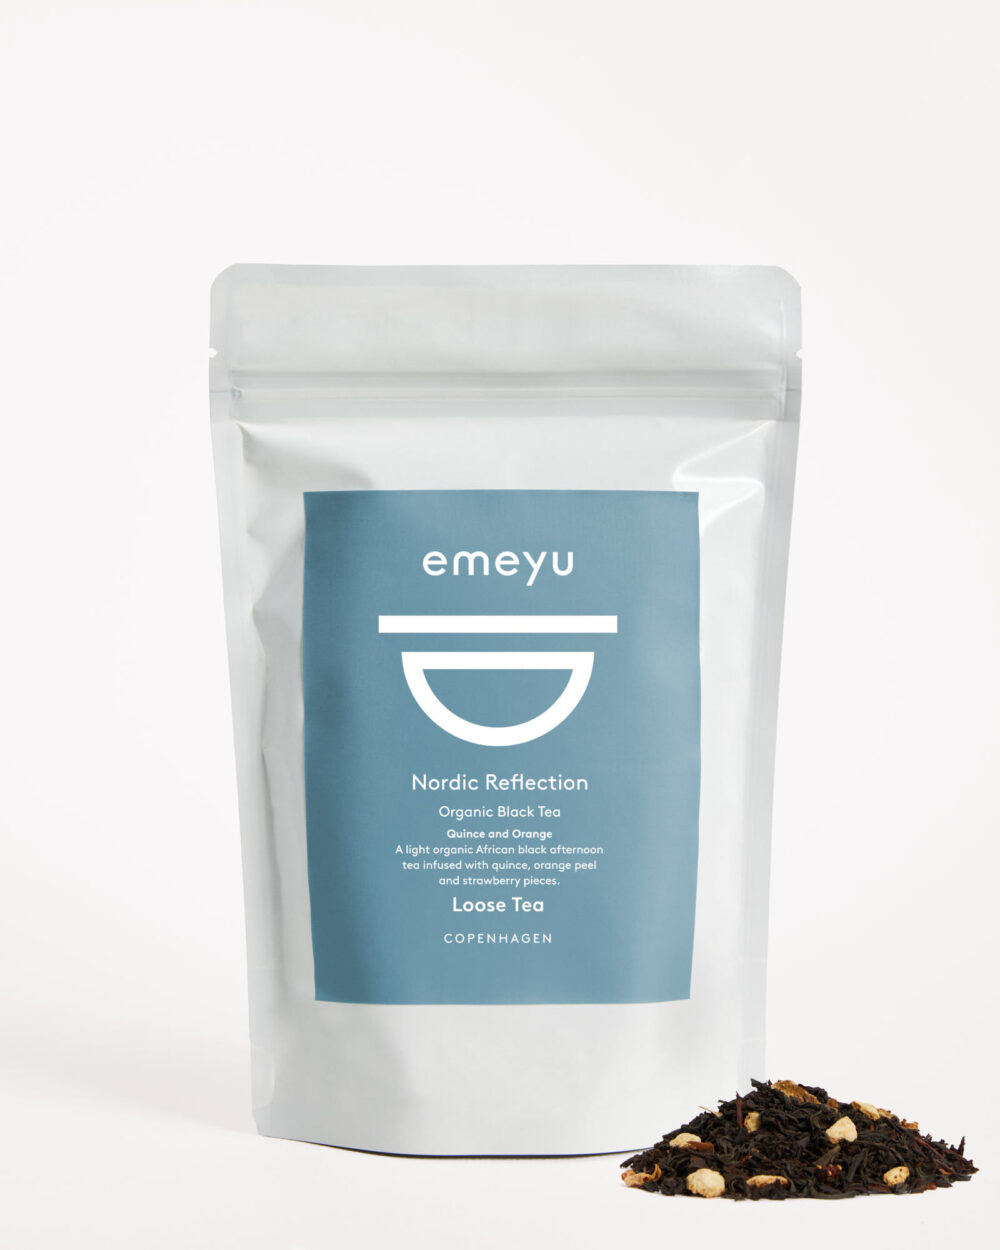 Nordic Reflection organic black tea with quince and orange. 80 g loose tea in a bag.